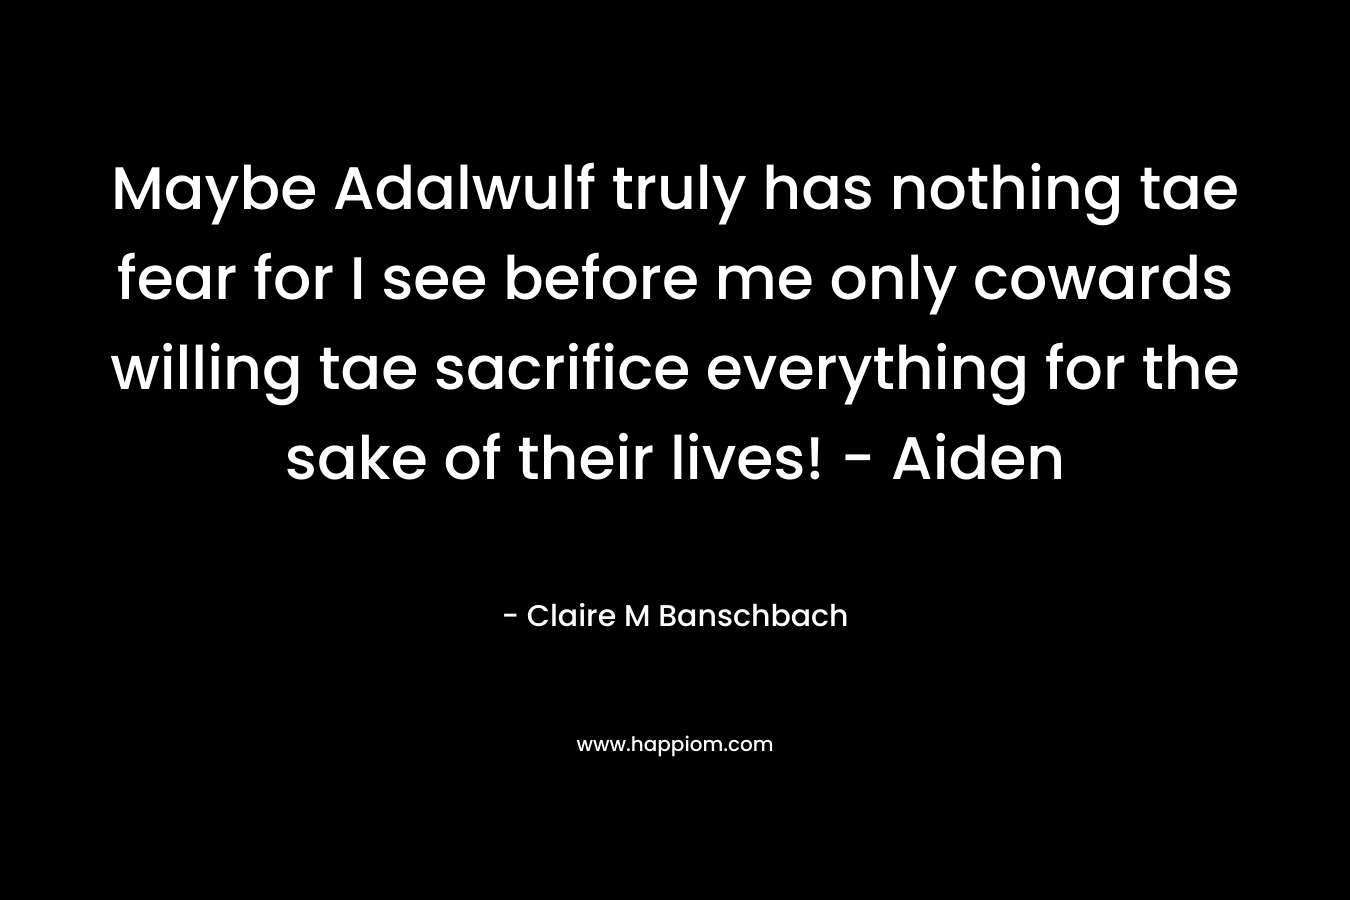 Maybe Adalwulf truly has nothing tae fear for I see before me only cowards willing tae sacrifice everything for the sake of their lives! - Aiden